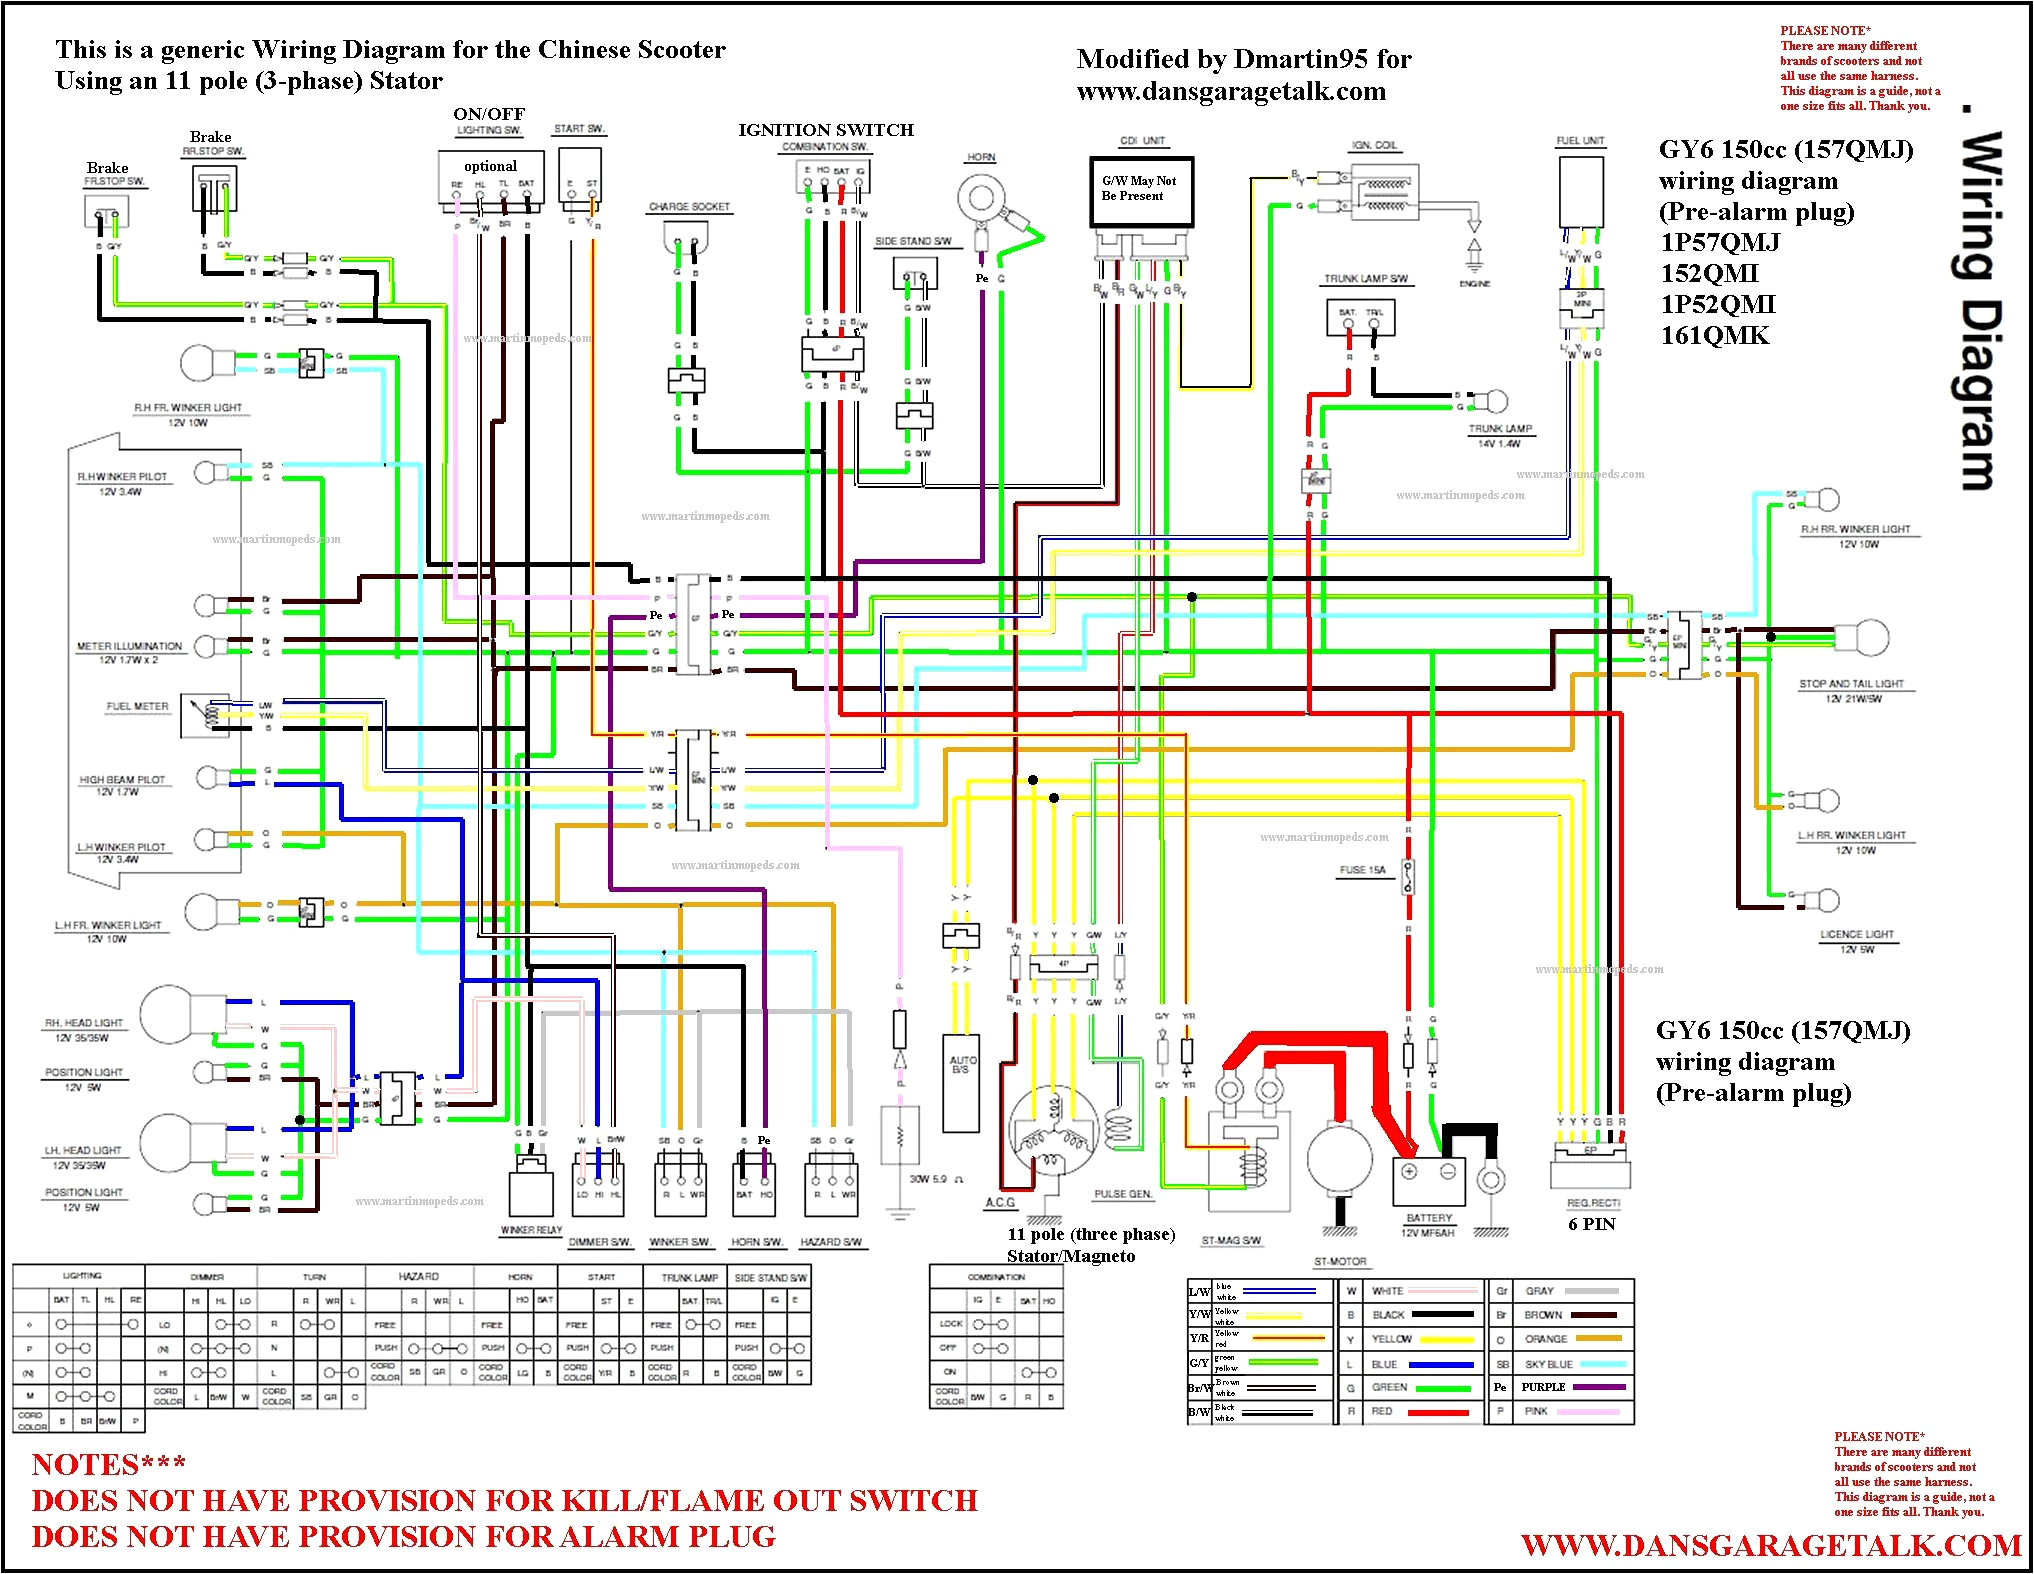 scooter wiring diagram wiring diagram show chinese scooter cdi wiring diagram chinese scooters wiring diagram